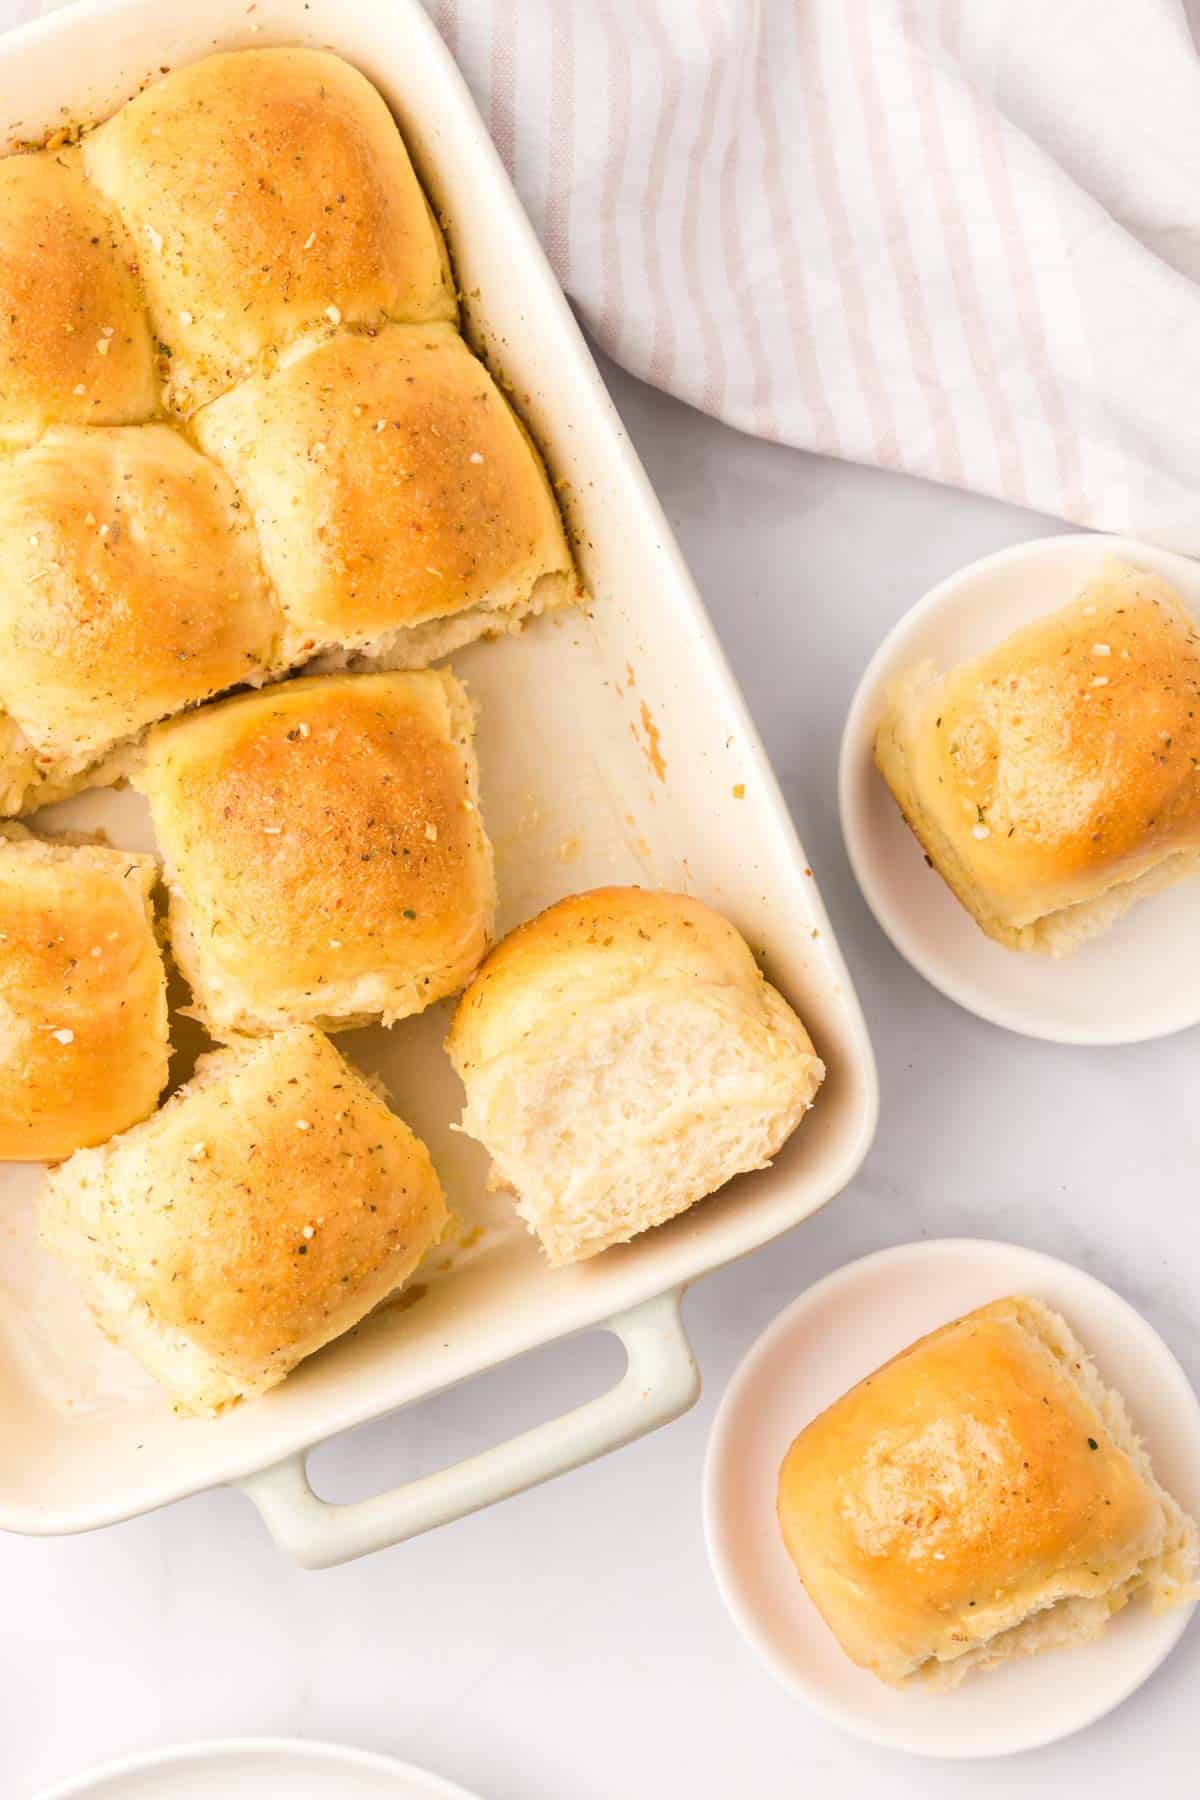 A white baking dish filled with homemade dinner rolls on a white table with two rolls on bread plates off to the side.